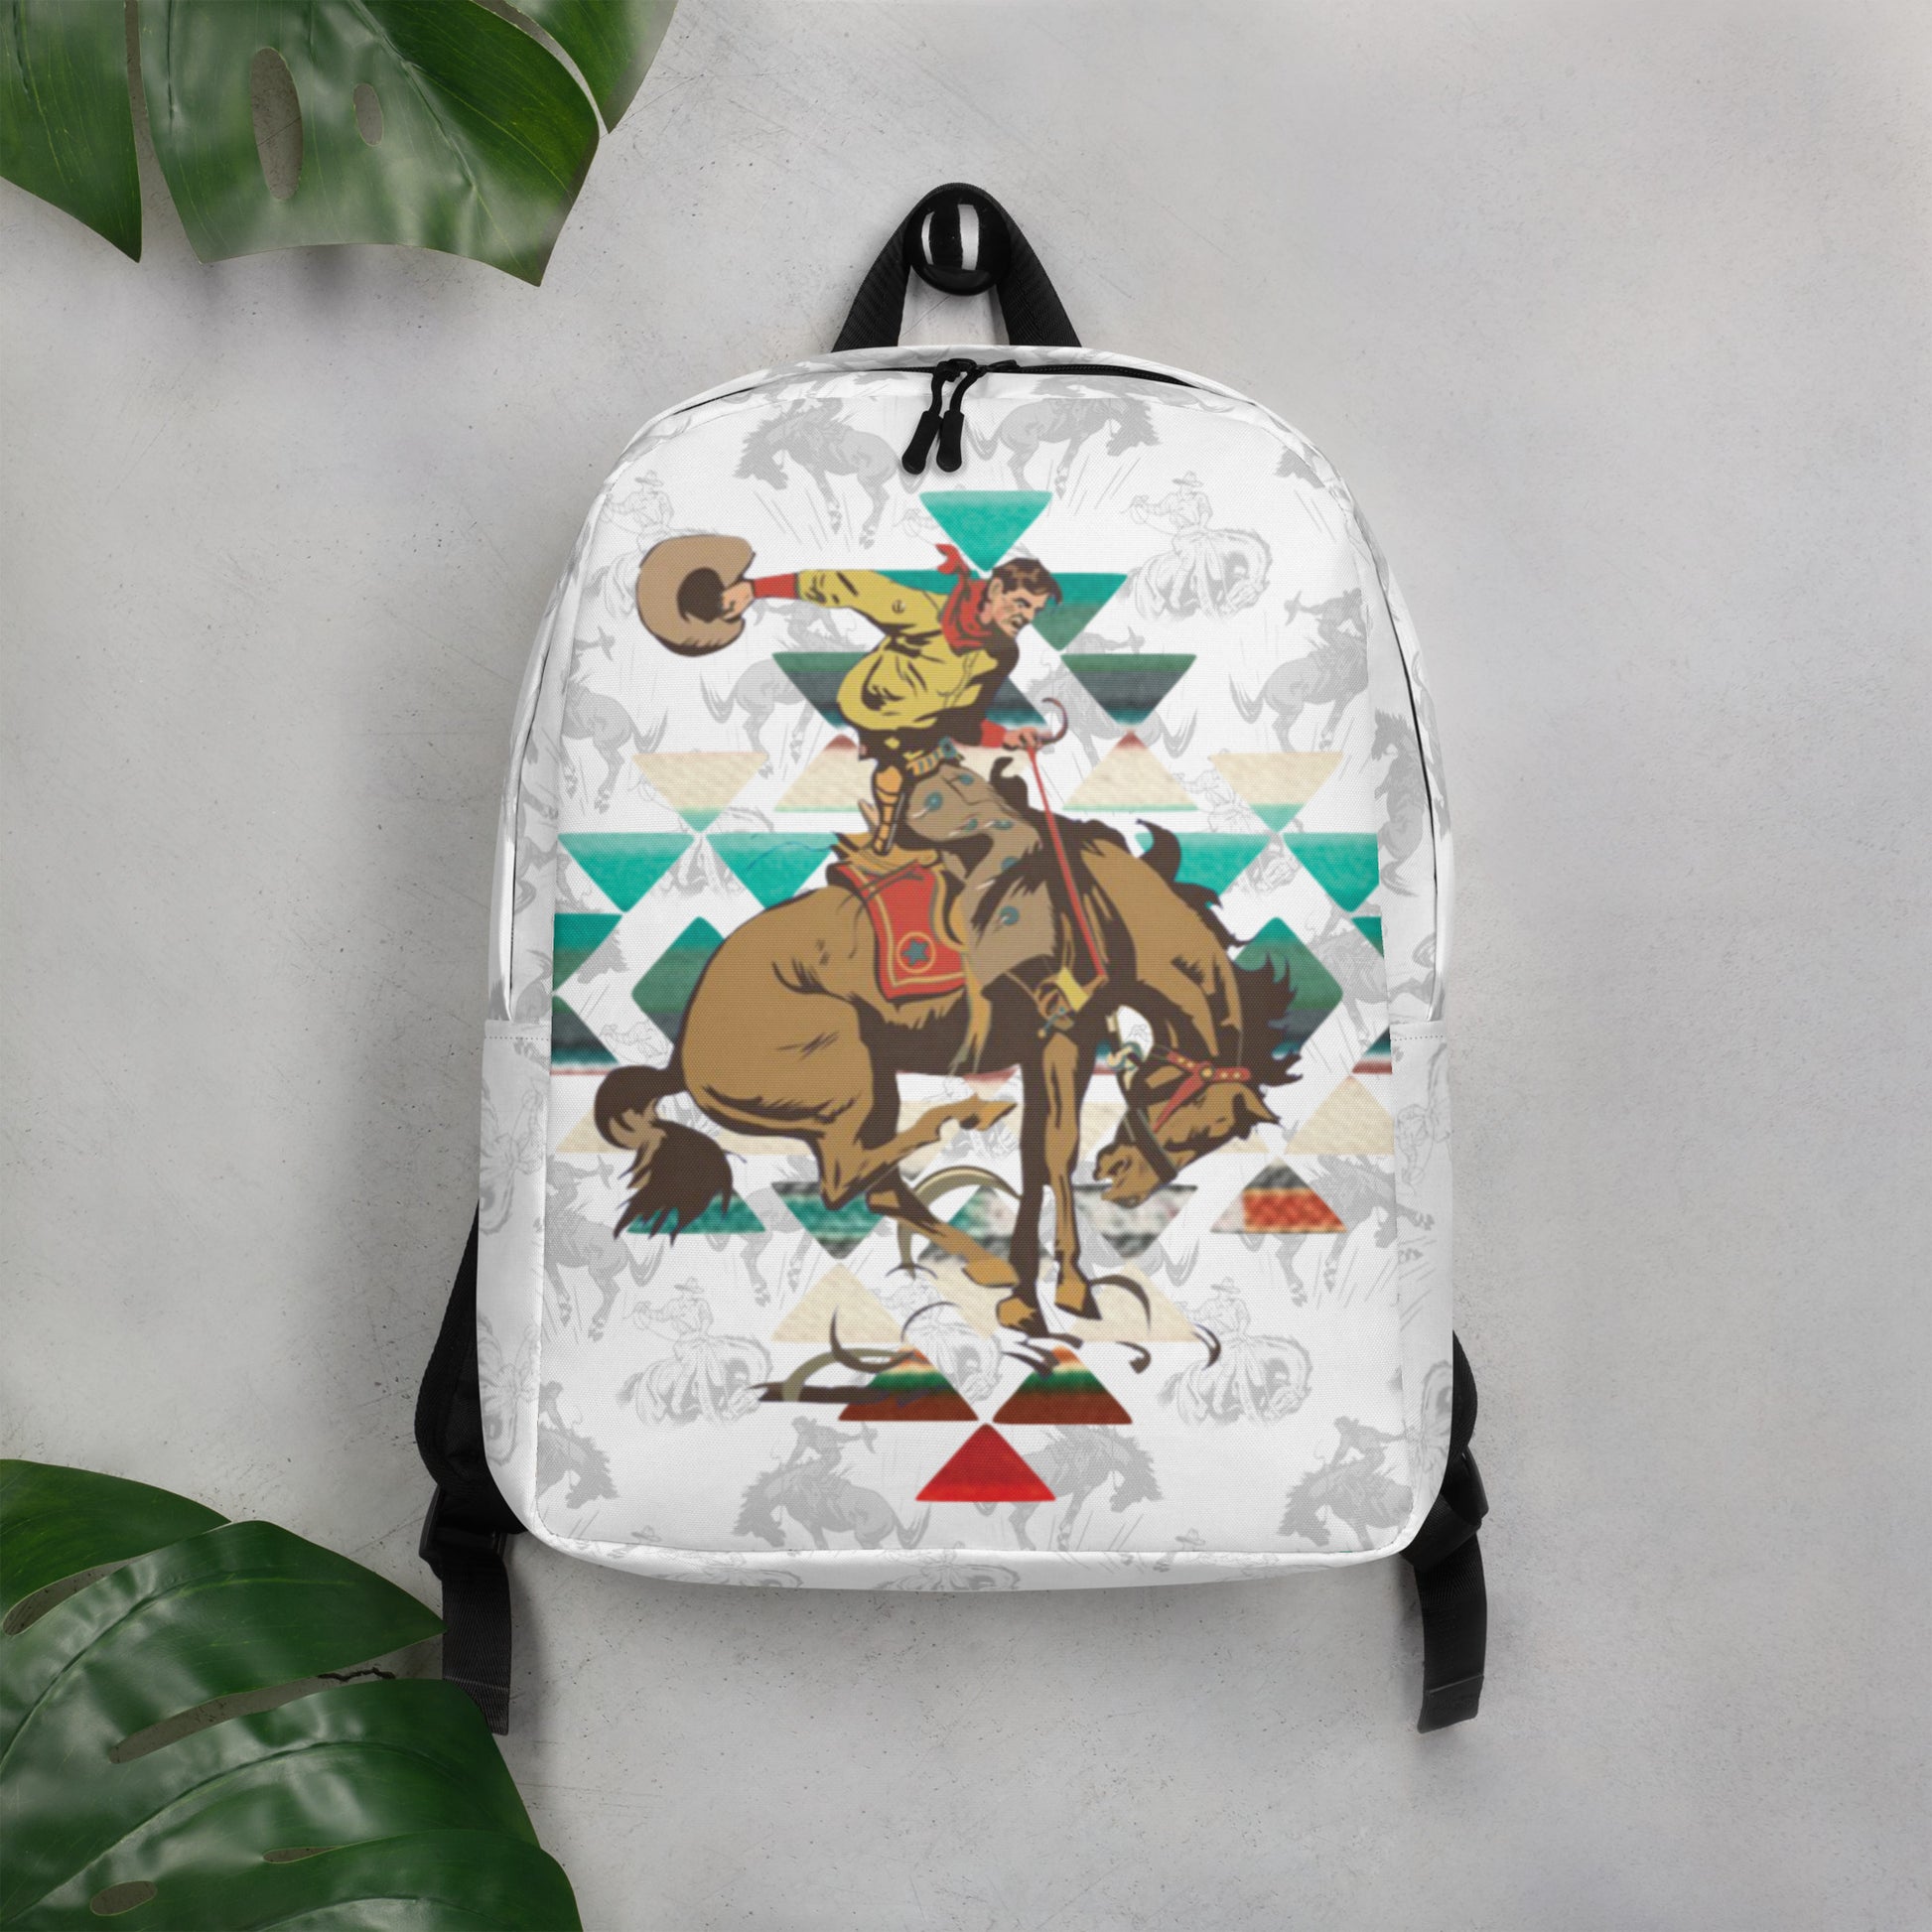 Aztec Bronc Minimalist Backpack - aztec, aztec bronc, back pack, backpack, bronc, bronco, gym, rodeo, rodeo life, rodeo style, rodeolife, weekend, workout -  - Baha Ranch Western Wear